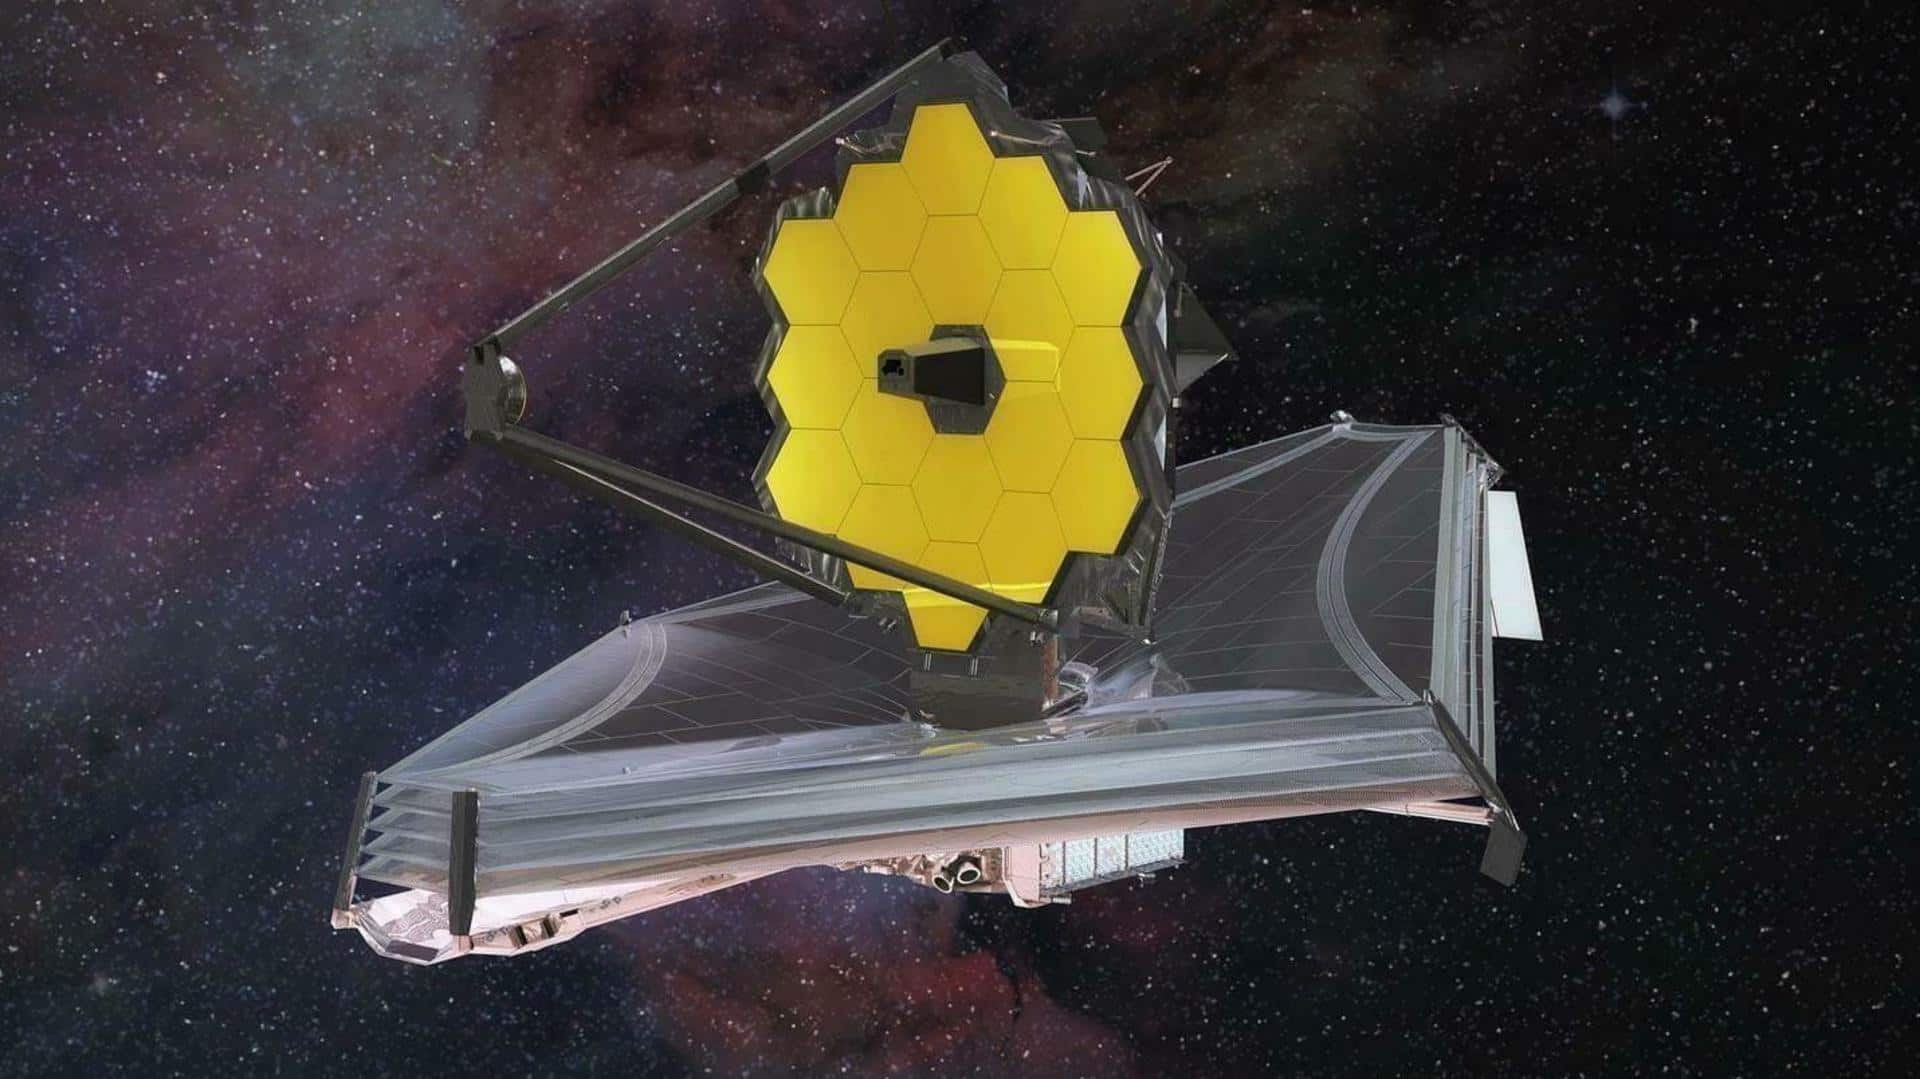 JWST's recent discoveries: From alien asteroid belt to early universe